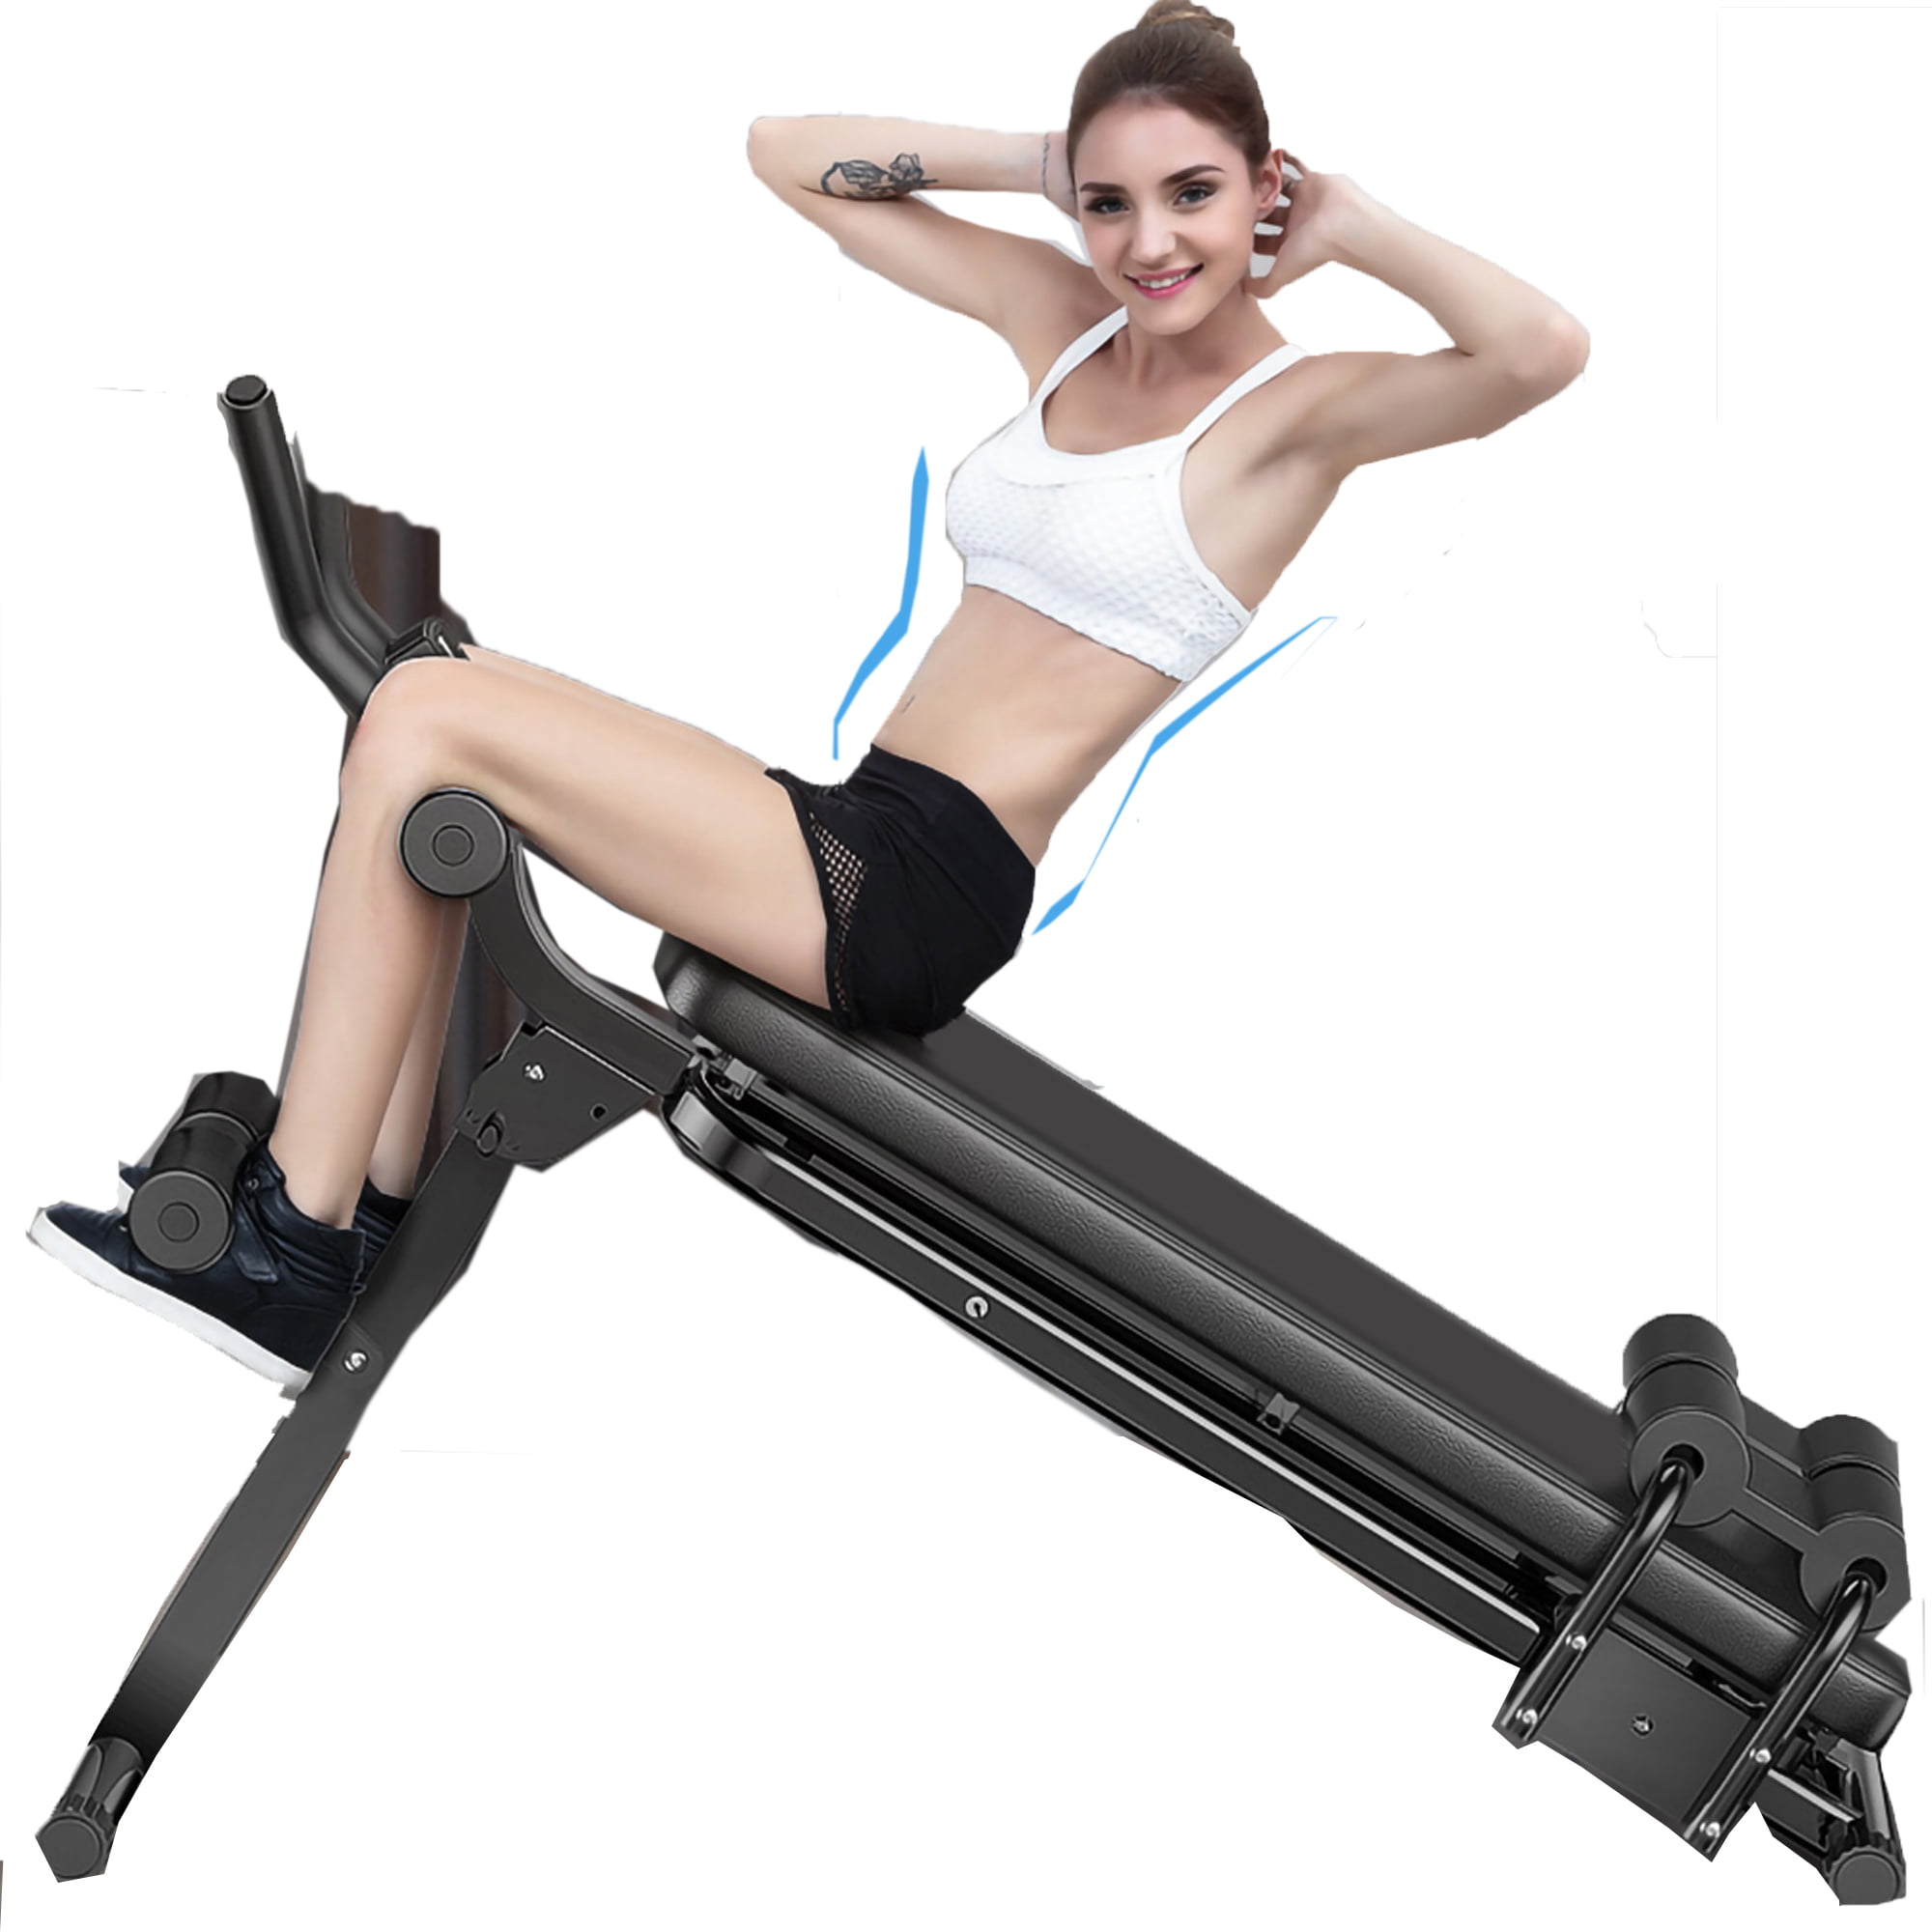 Details about   Sit Up Bench Decline Abdominal Fitness Home Gym Exercise Workout Equipment USA 